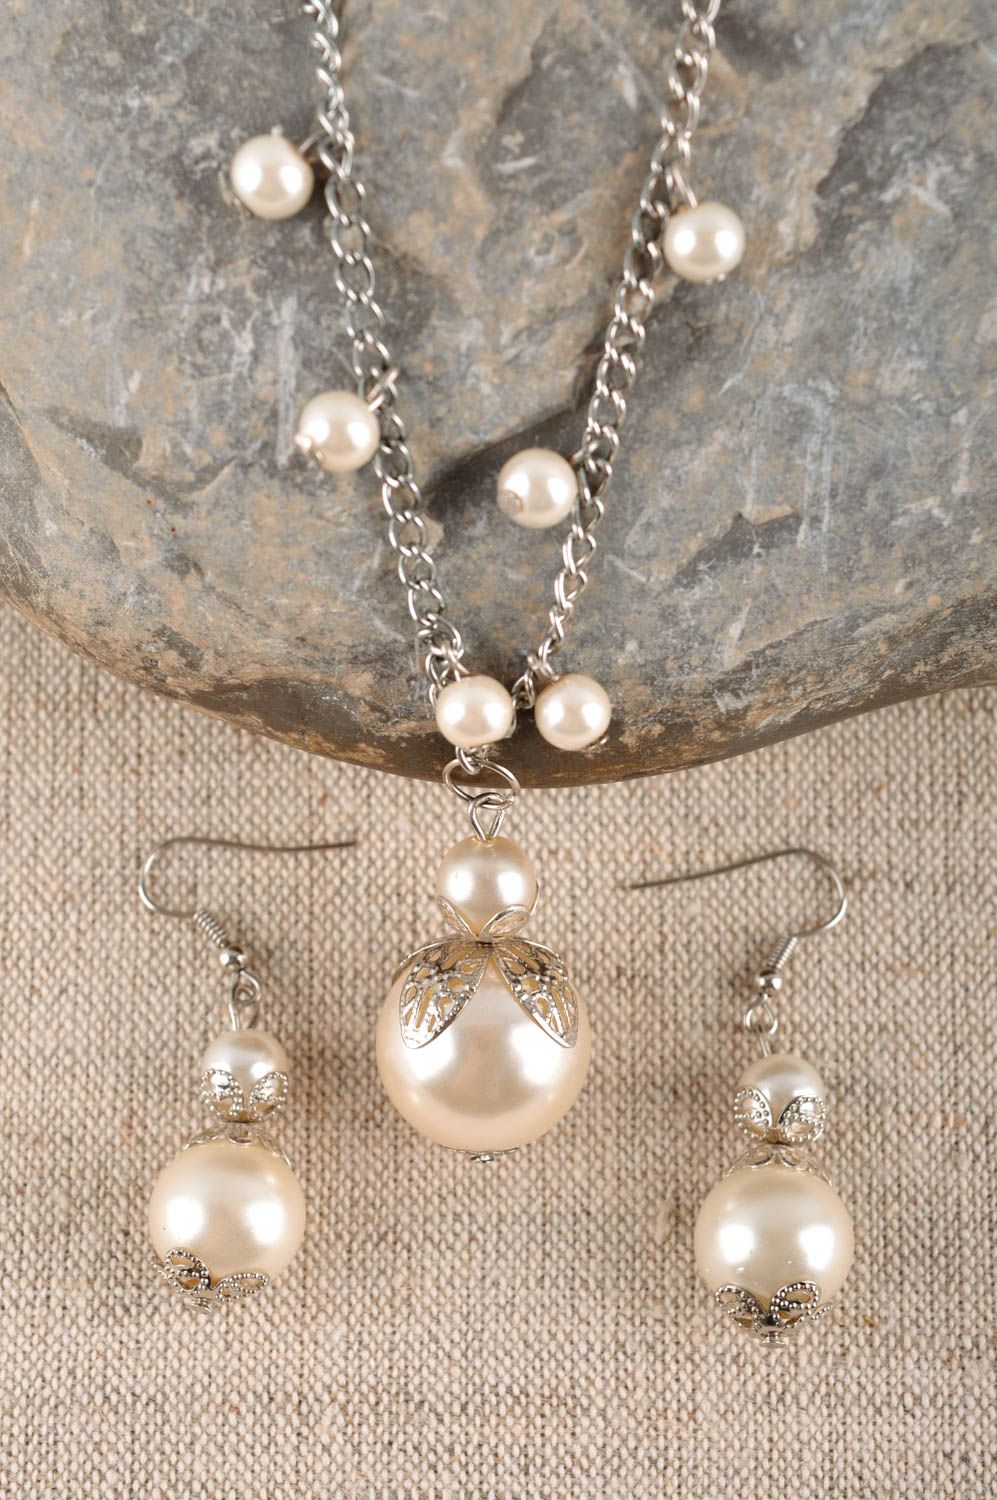 Handmade beaded jewelry long earrings pearl necklace delicate accessories photo 1